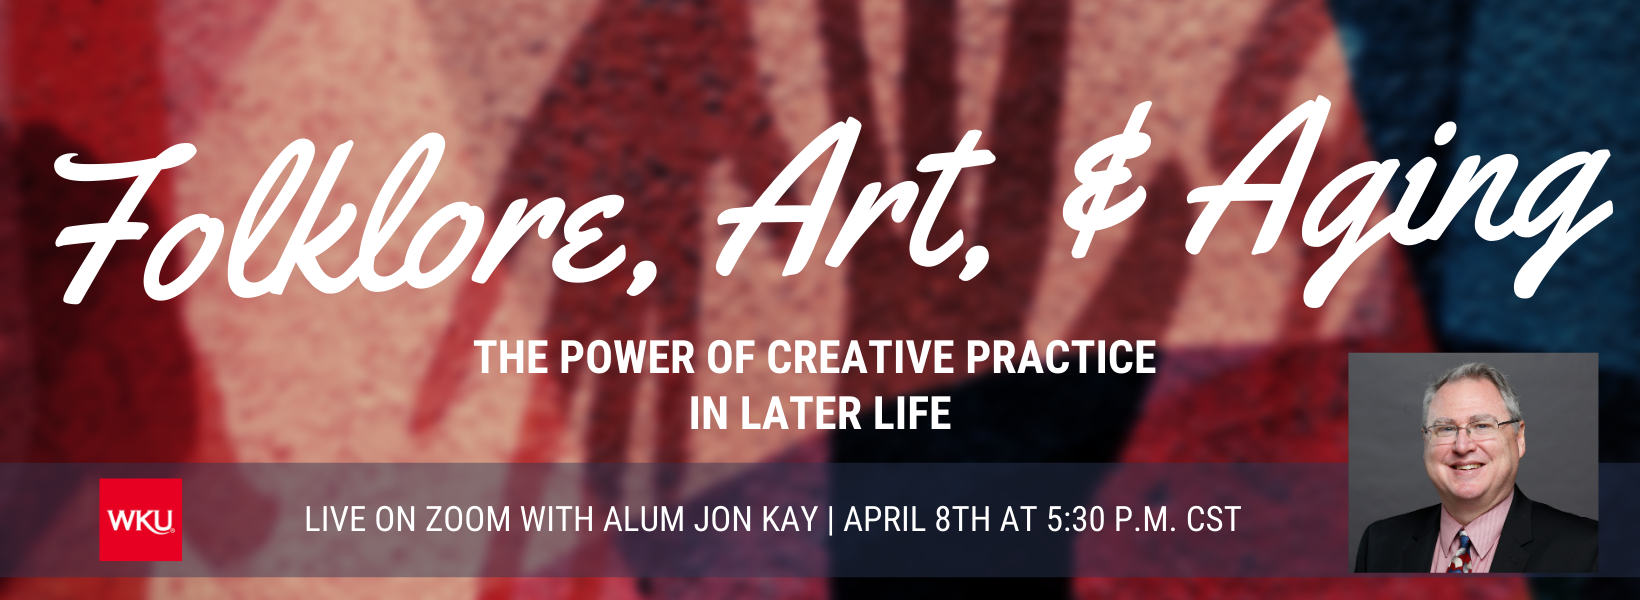 Join us for a live Zoom talk by Jon Kay on Thursday, April 8 at 5:30 CST titled “Folklore, Art, and Aging: The Power of Creative Practice in Later Life.”